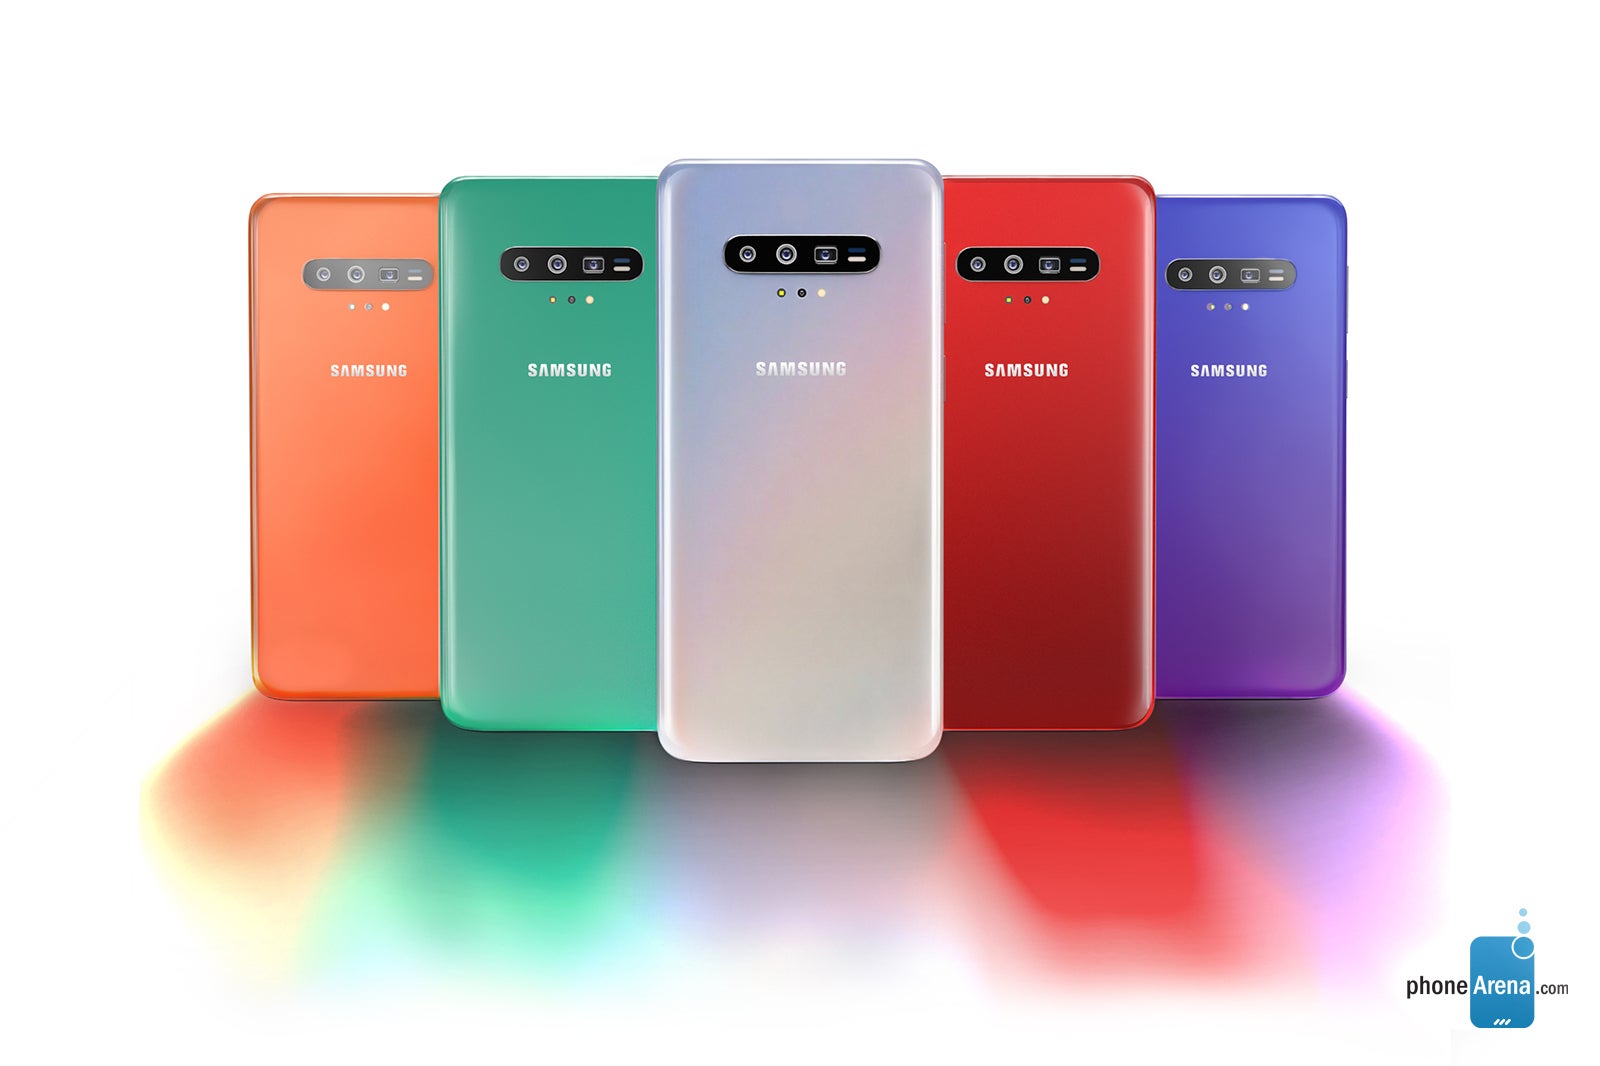 Samsung Galaxy S11 concept render - New Galaxy S11 leak details larger displays, five models, 5G support, more